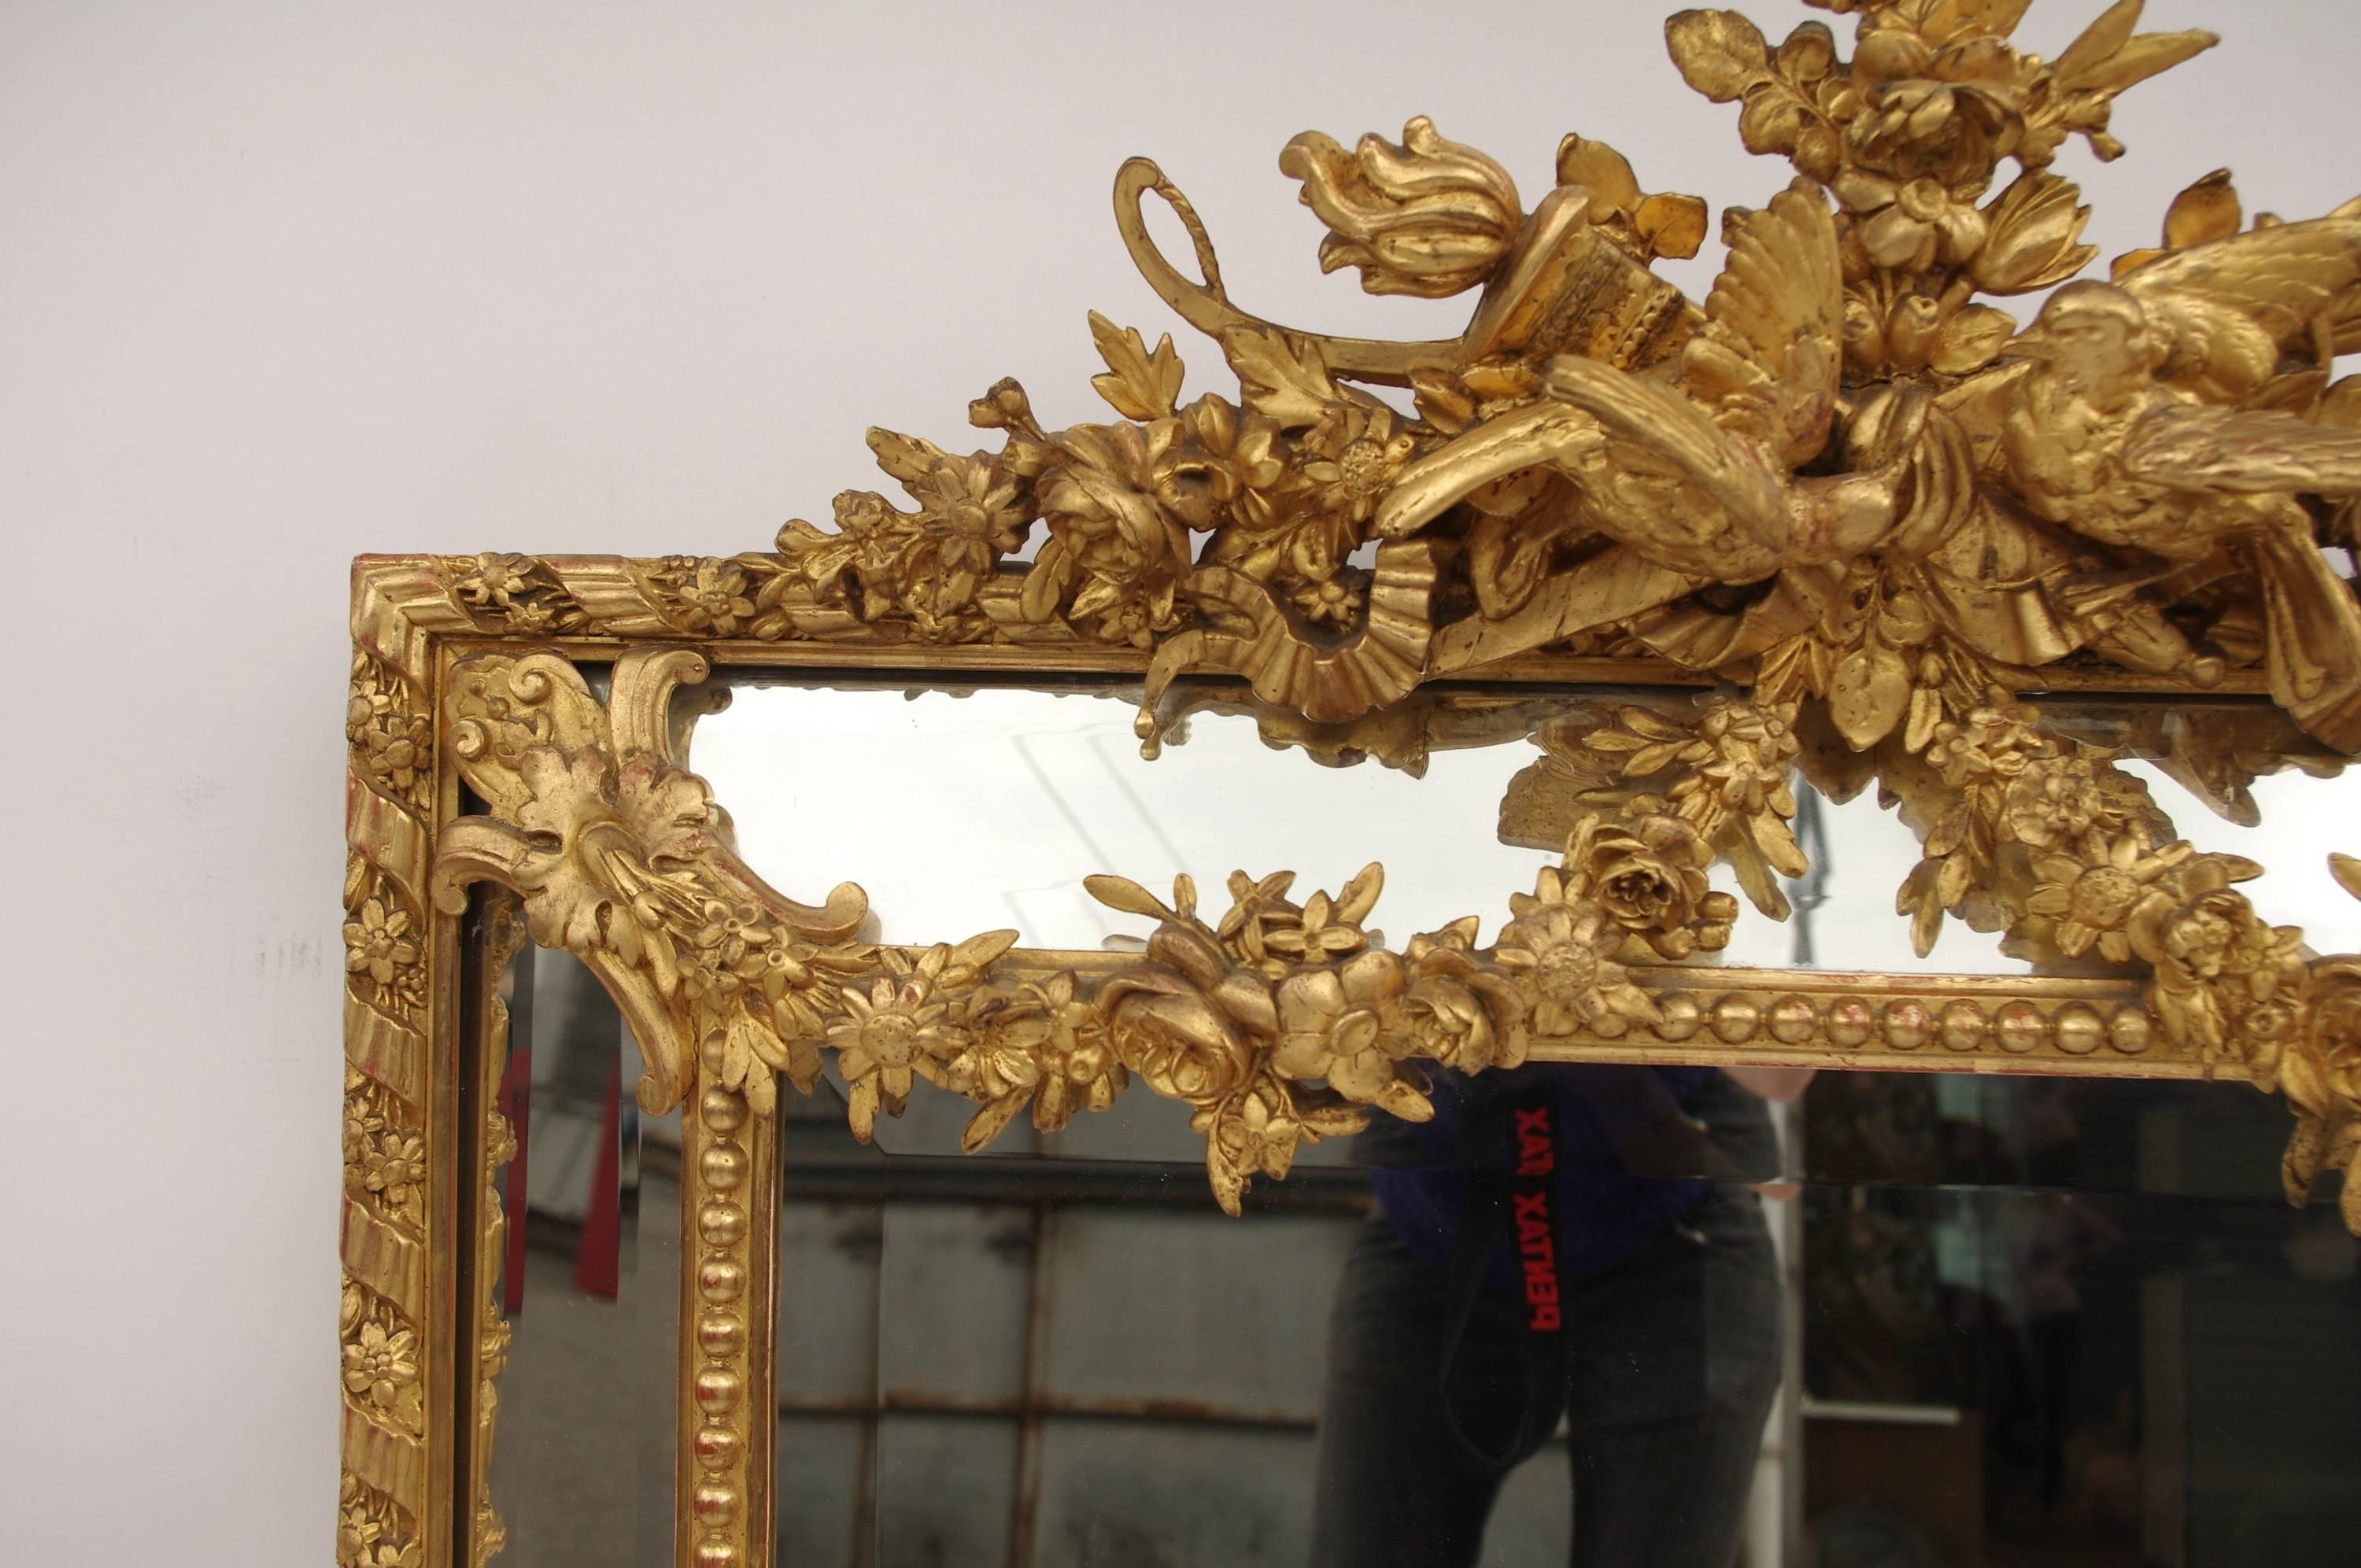 Louis XVI style.
Napoleon III period.
Gilt stucco.
Having flowers, birds and quiver pediment.
This mirror has been made in a style known as a 